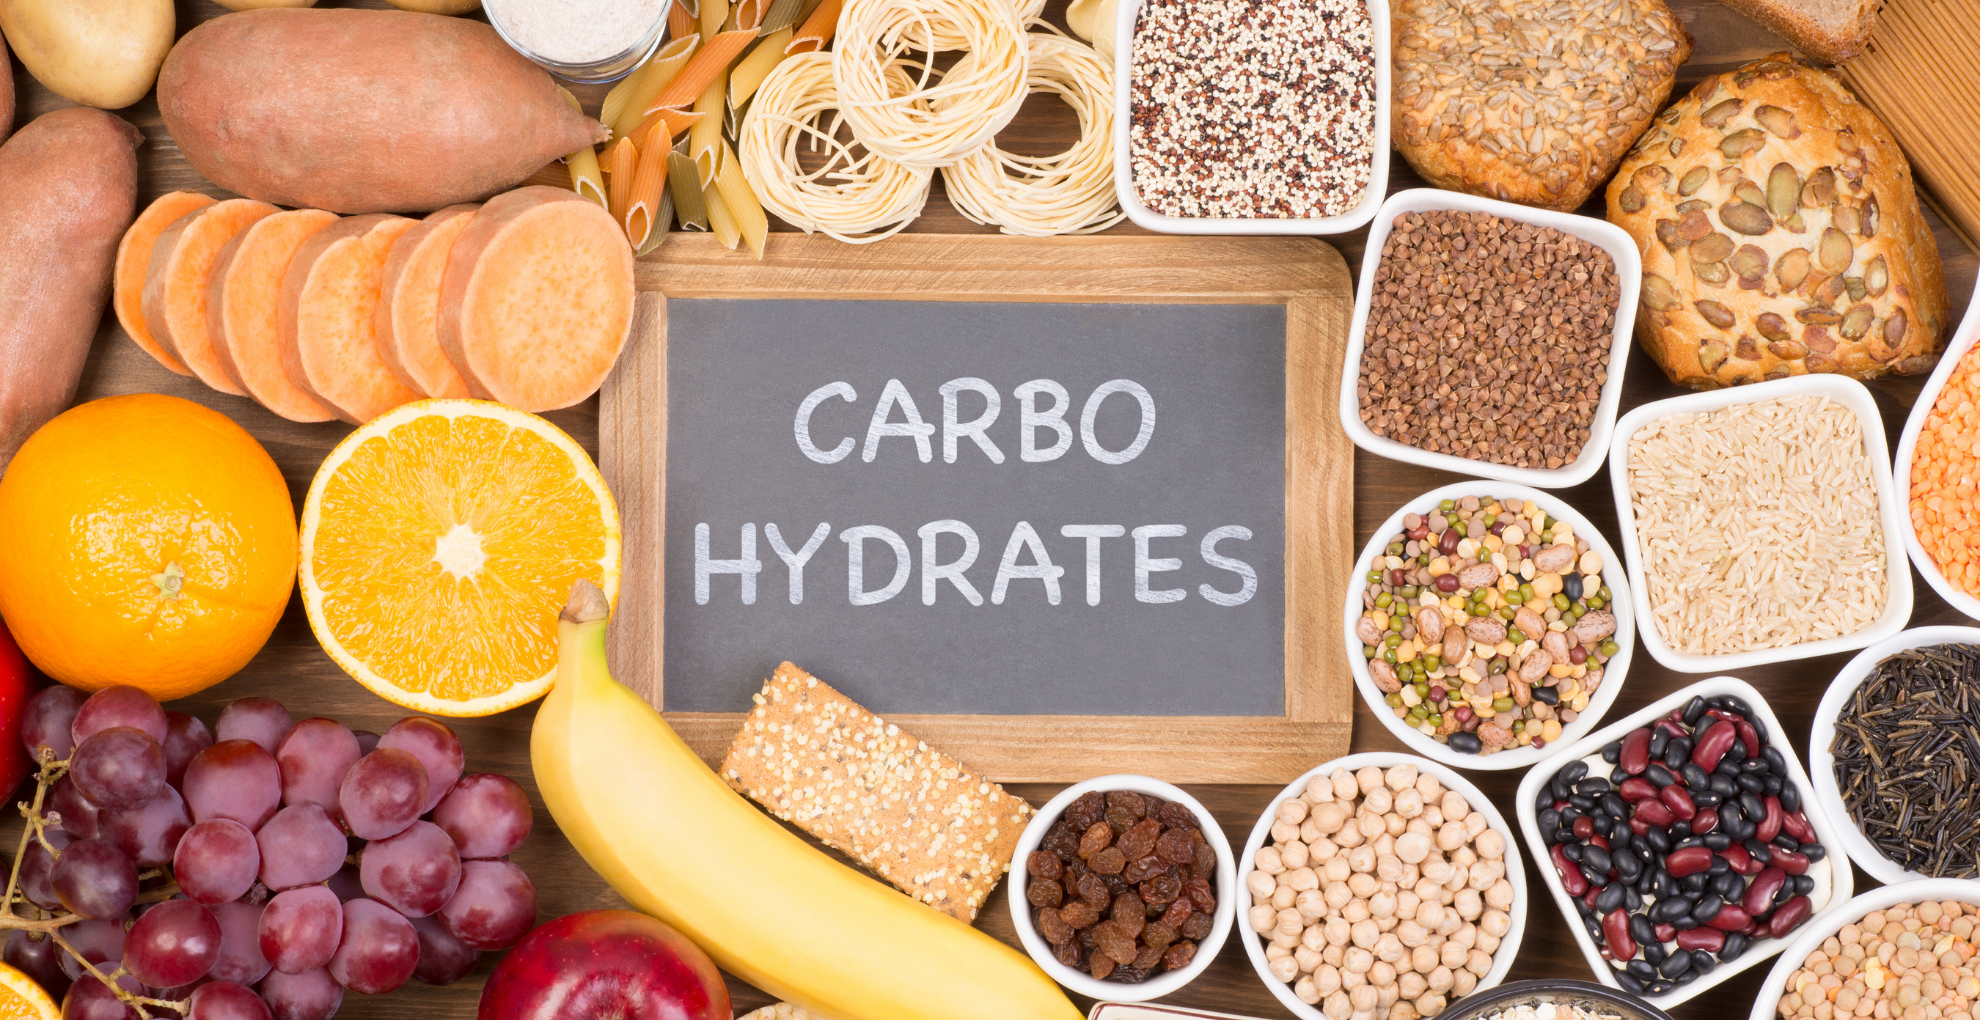 What is Carbohydrate? How to read carbohydrates on food packaging?